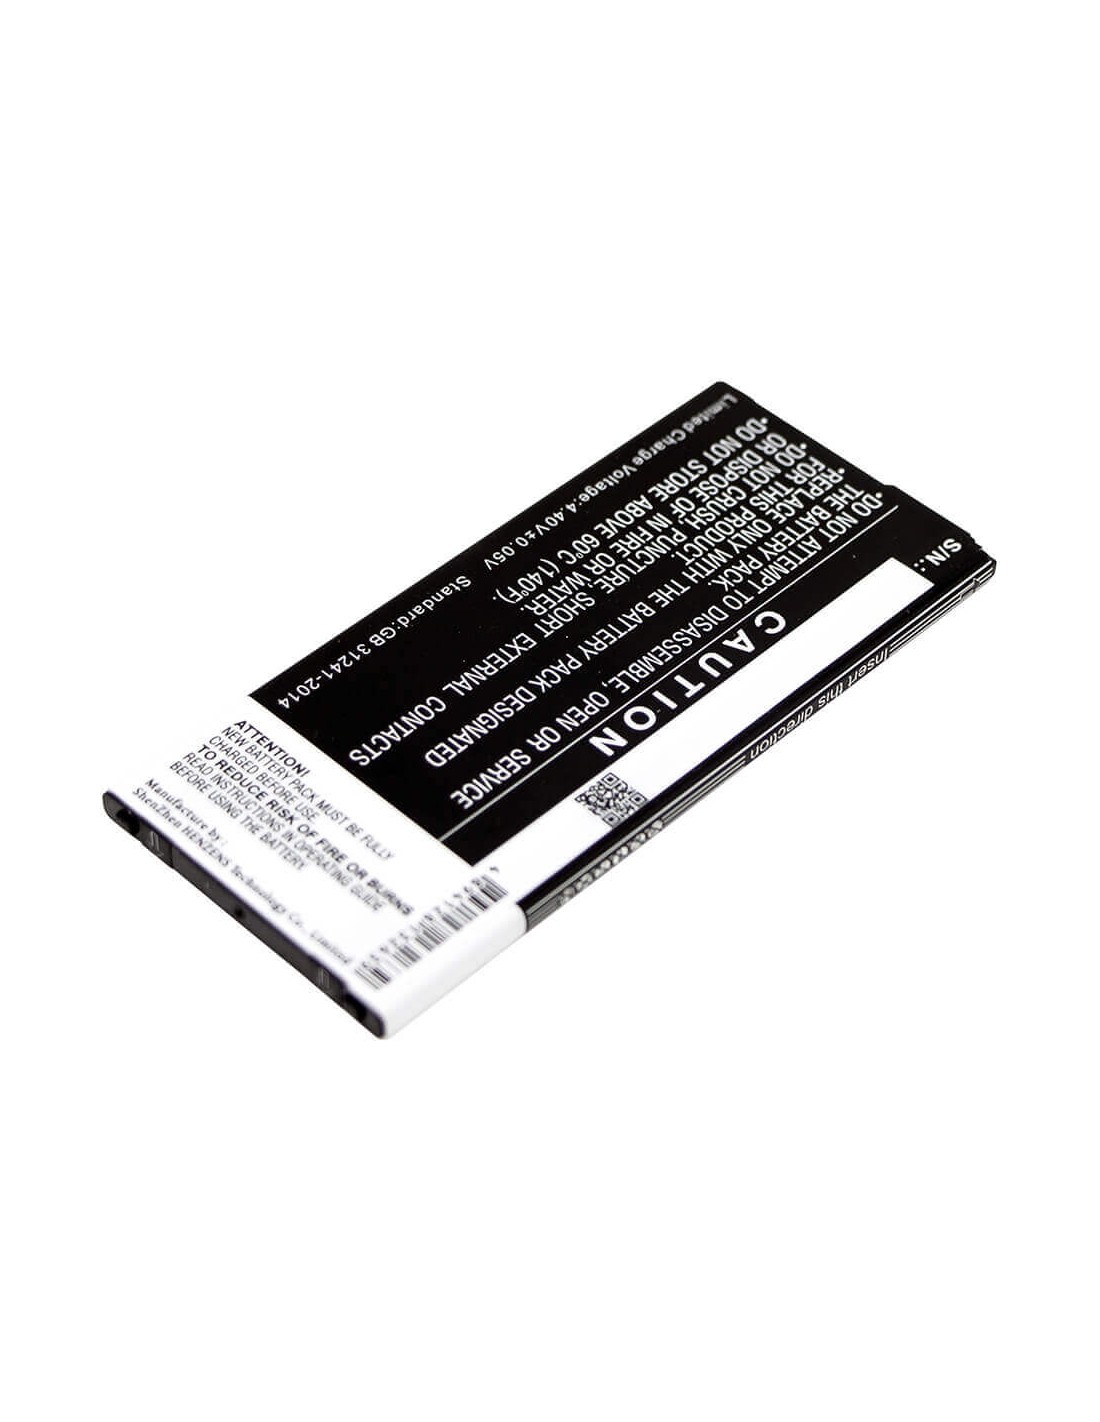 Battery for Samsung, Galaxy A7 2016 Duos, Galaxy A7 2016 Duos 3.85V, 3300mAh - 12.71Wh